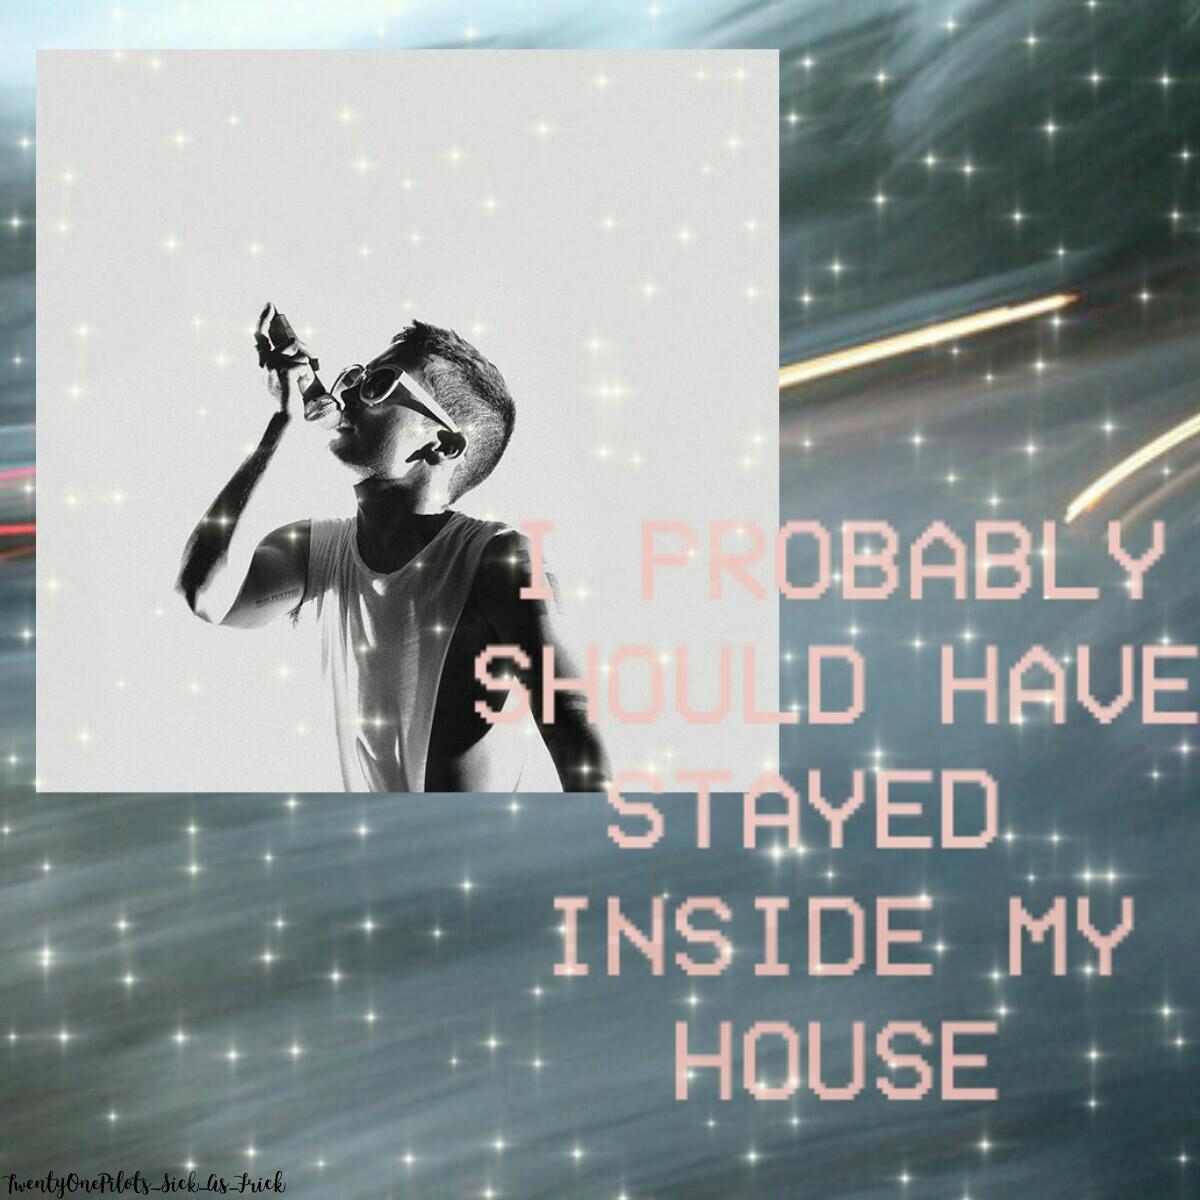 CLICK HERE
a simple Tyler edit. posted on my collab acc. #pconly